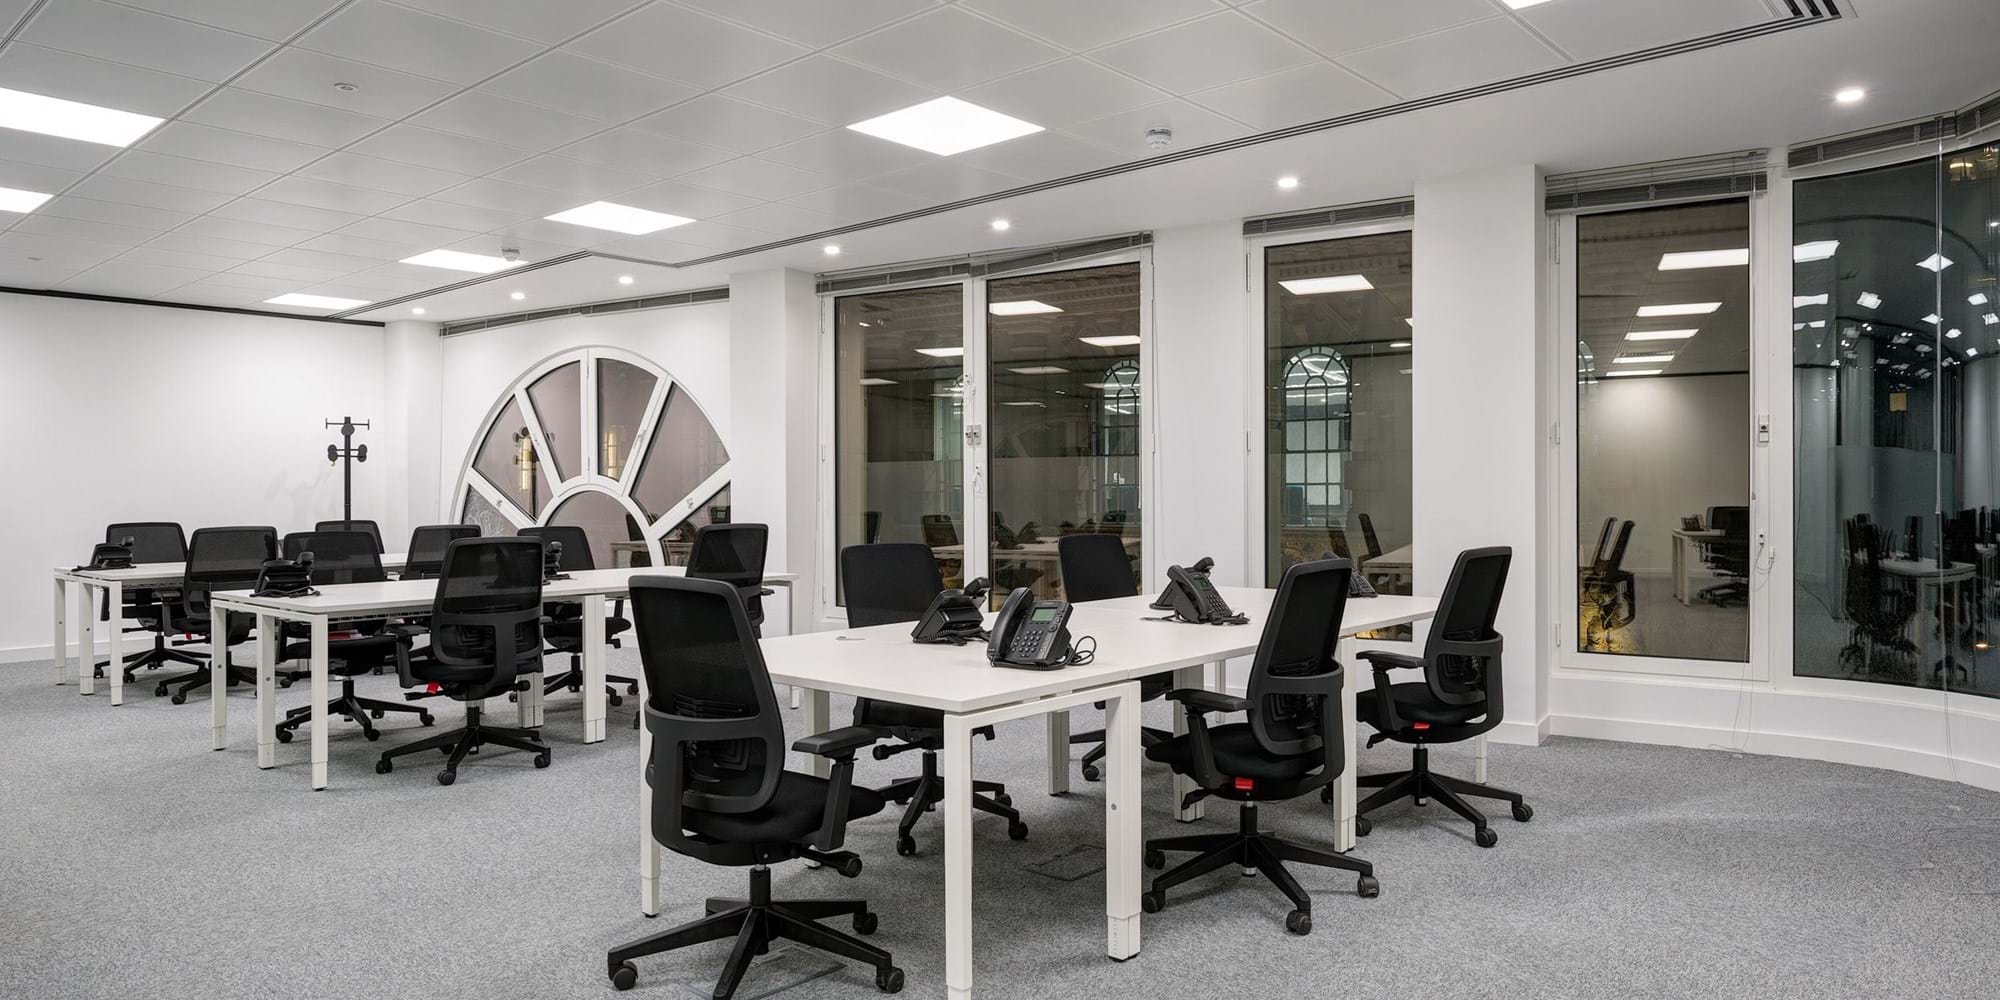 Modus Workspace office design, fit out and refurbishment - Spaces - Moorgate, London - Spaces Moorgate 13 highres sRGB.jpg